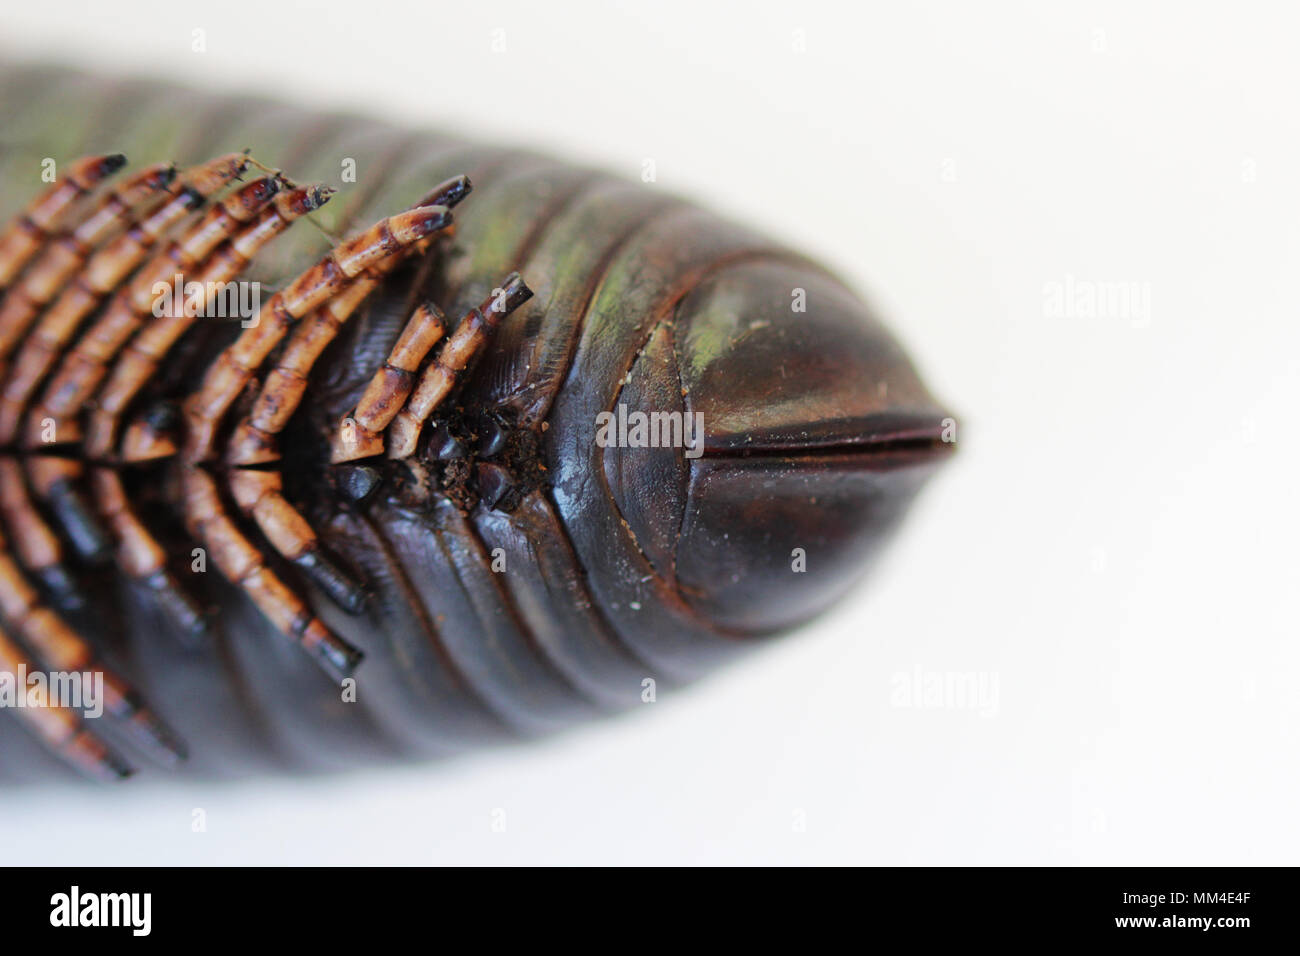 set of extremities and the rear tail of giant African millipede. Macro Stock Photo